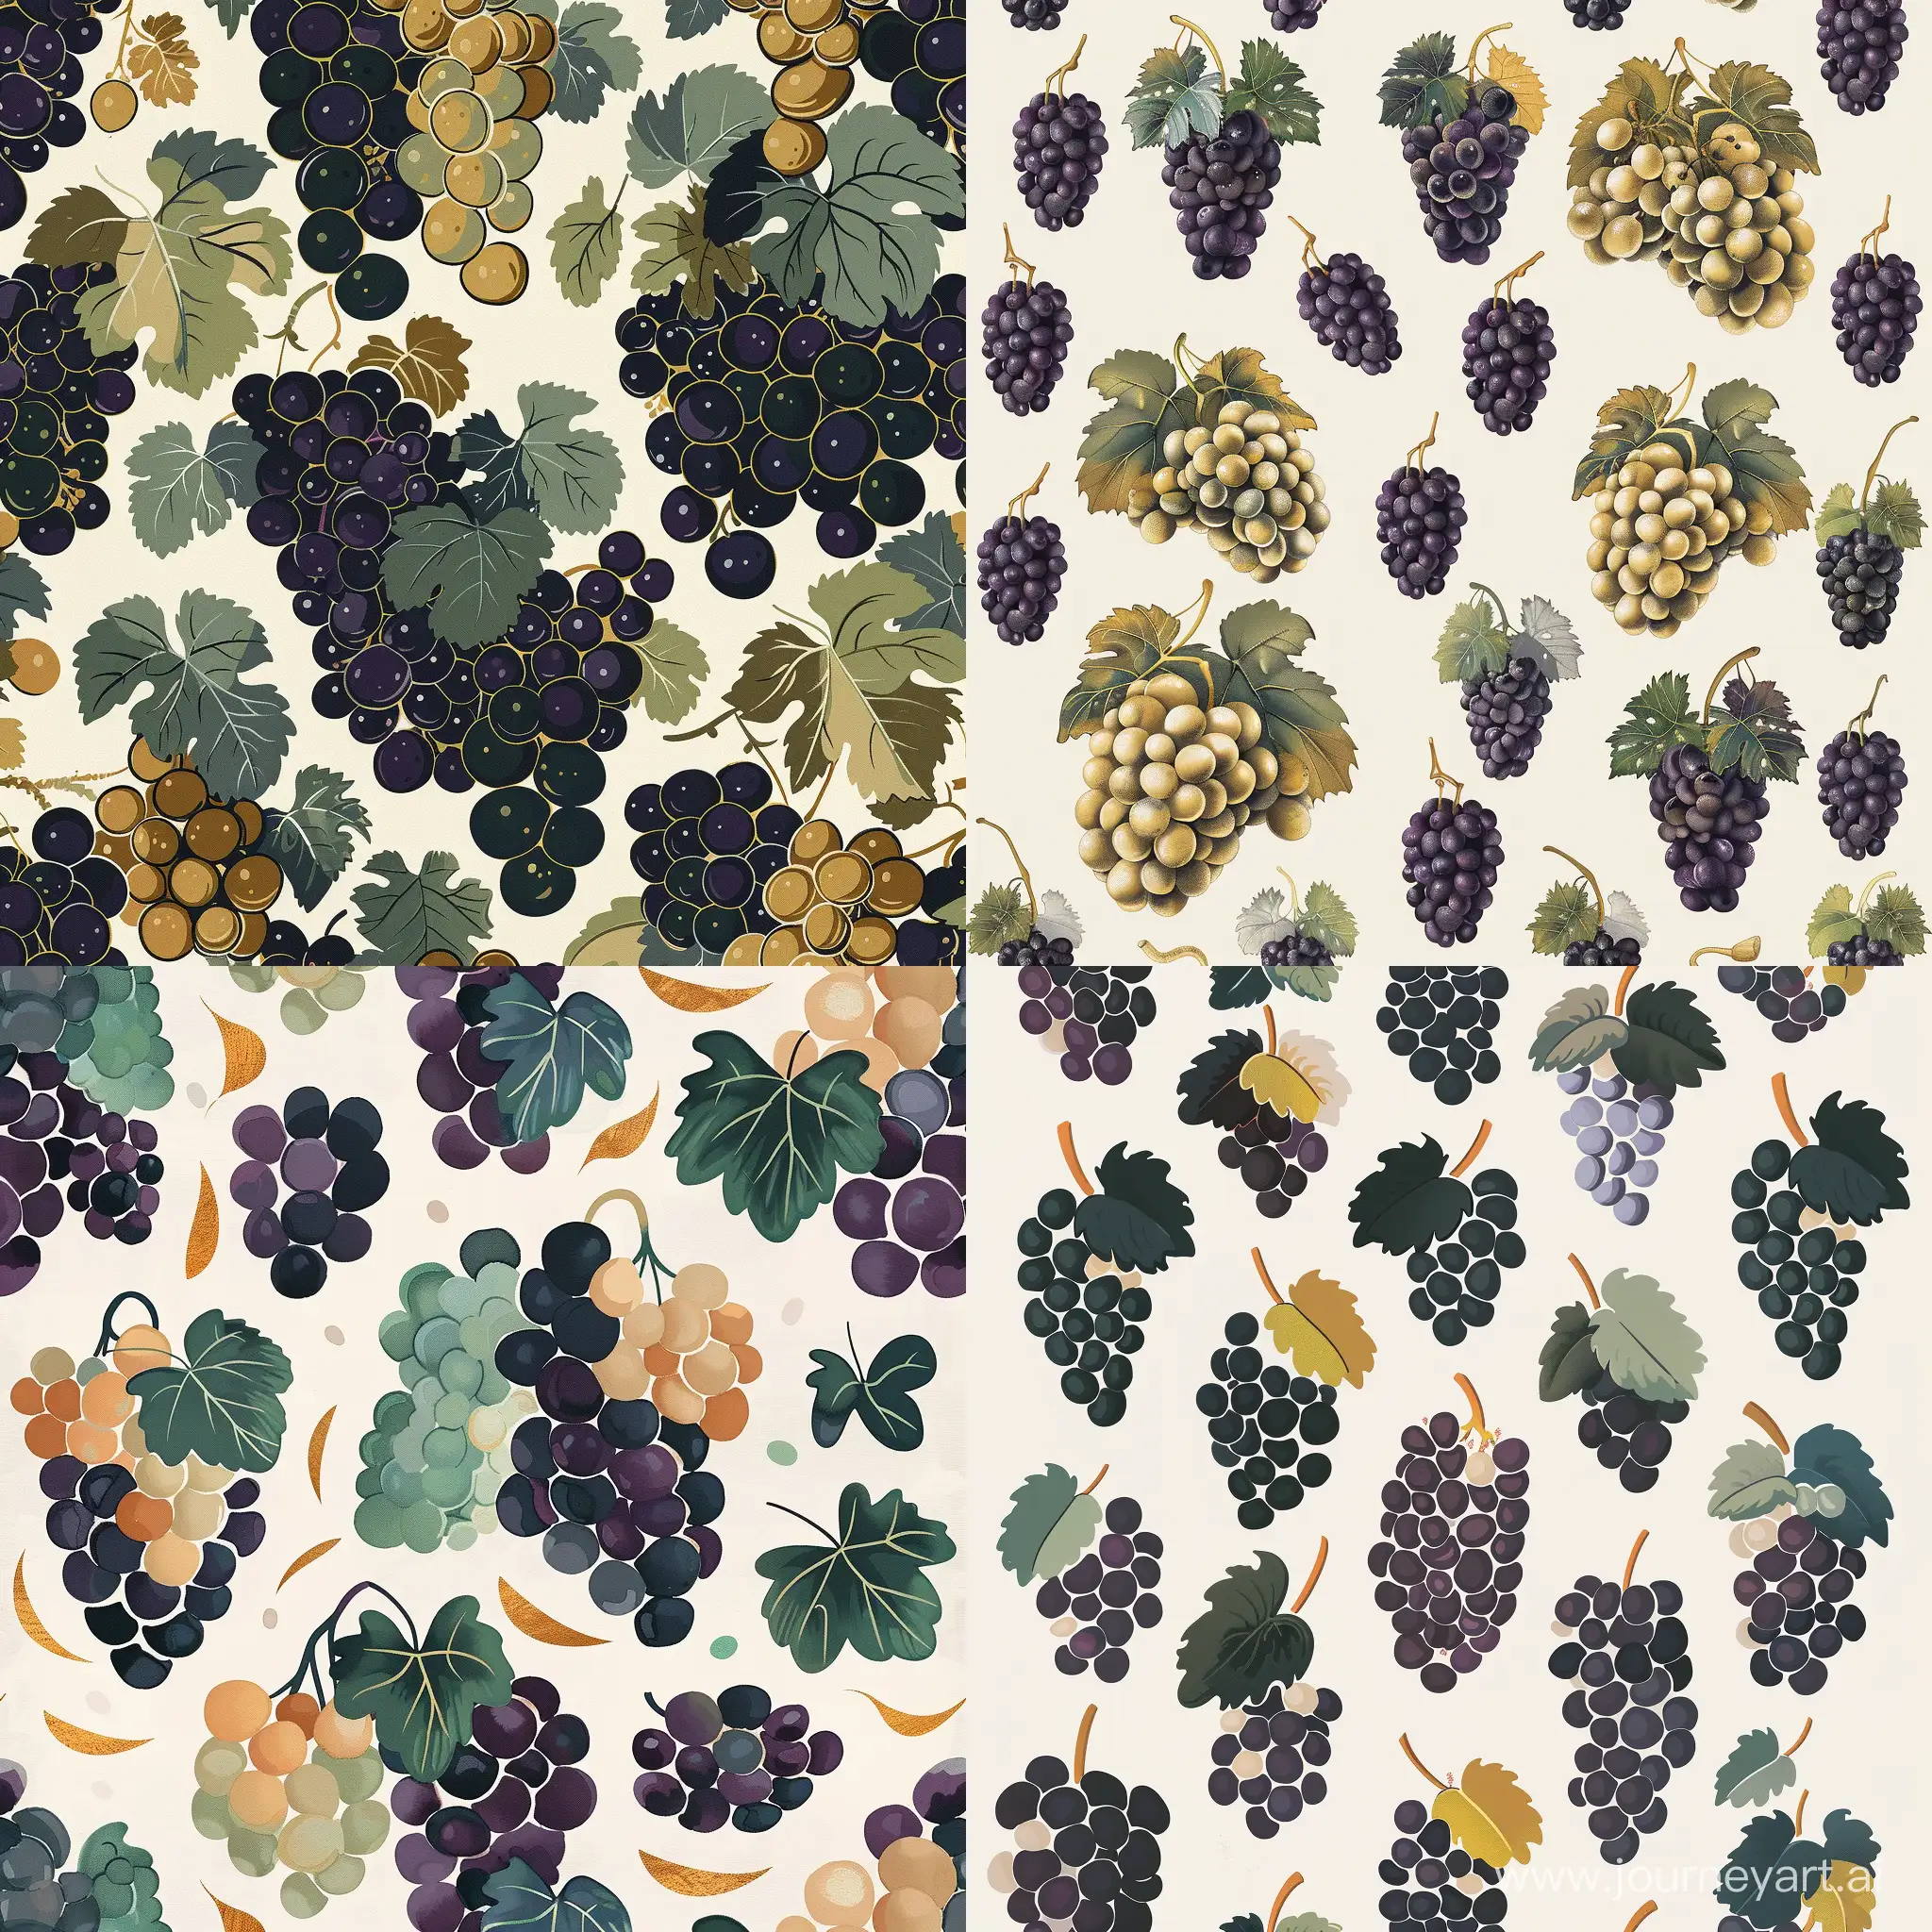 A pattern featuring stylized illustrations of grape clusters in various stages of ripeness, arranged in a repeating motif. This pattern could utilize soft, organic shapes and lush colors like deep purple, green, and gold to evoke the essence of vine-ripened grapes.